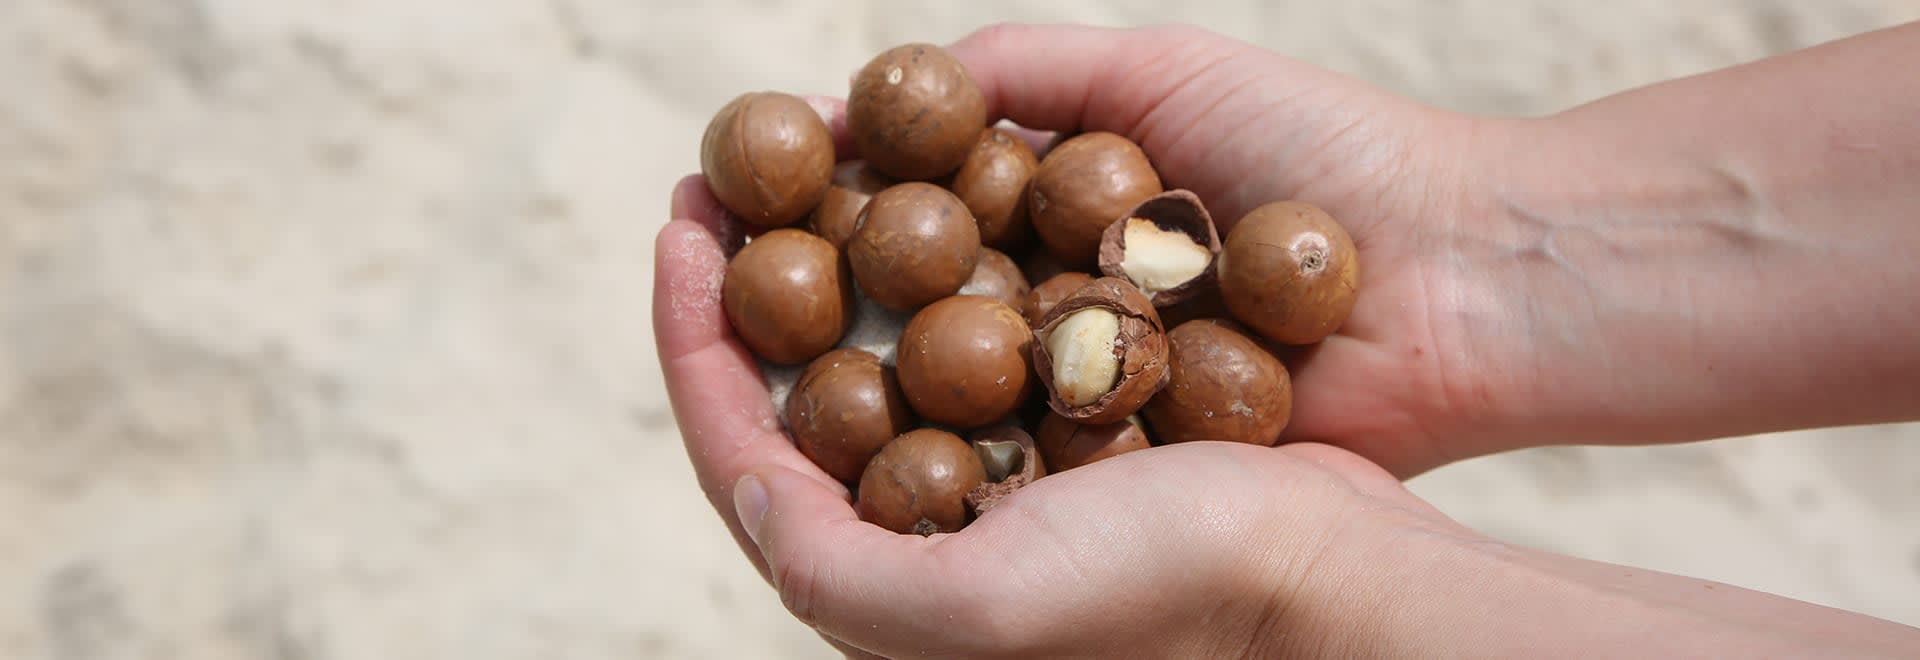 A photo of macadamia nuts holded in hands